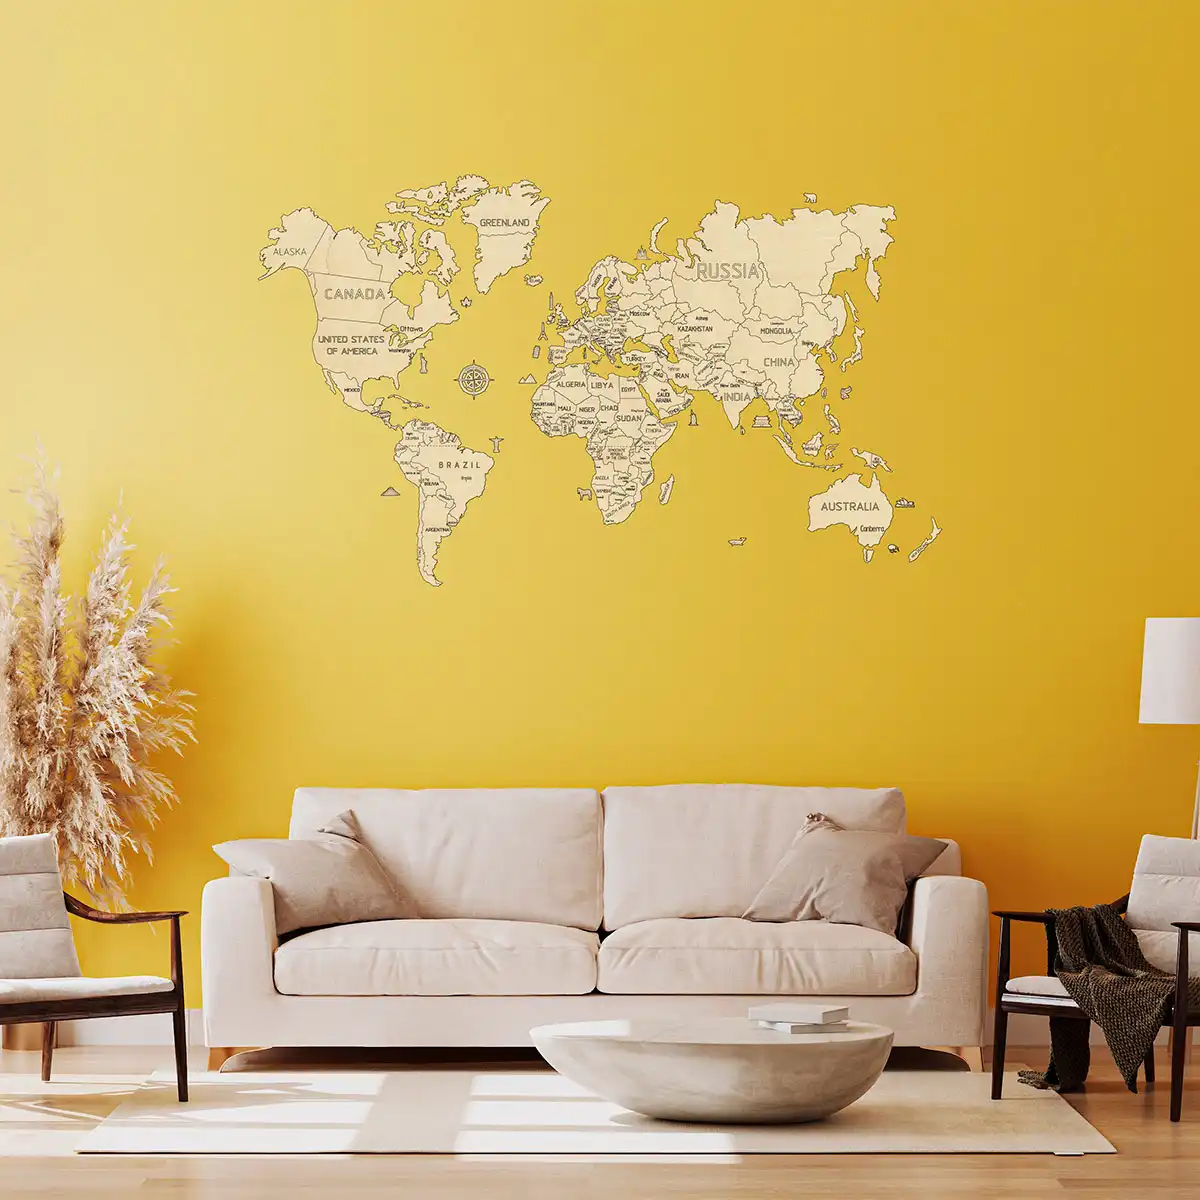  WOODEN.CITY Wooden World Map Wall Decor XL - Wooden Map of The  World for Wall - Places I've Been Map of the World Wall Art - Wood World  Map Wall